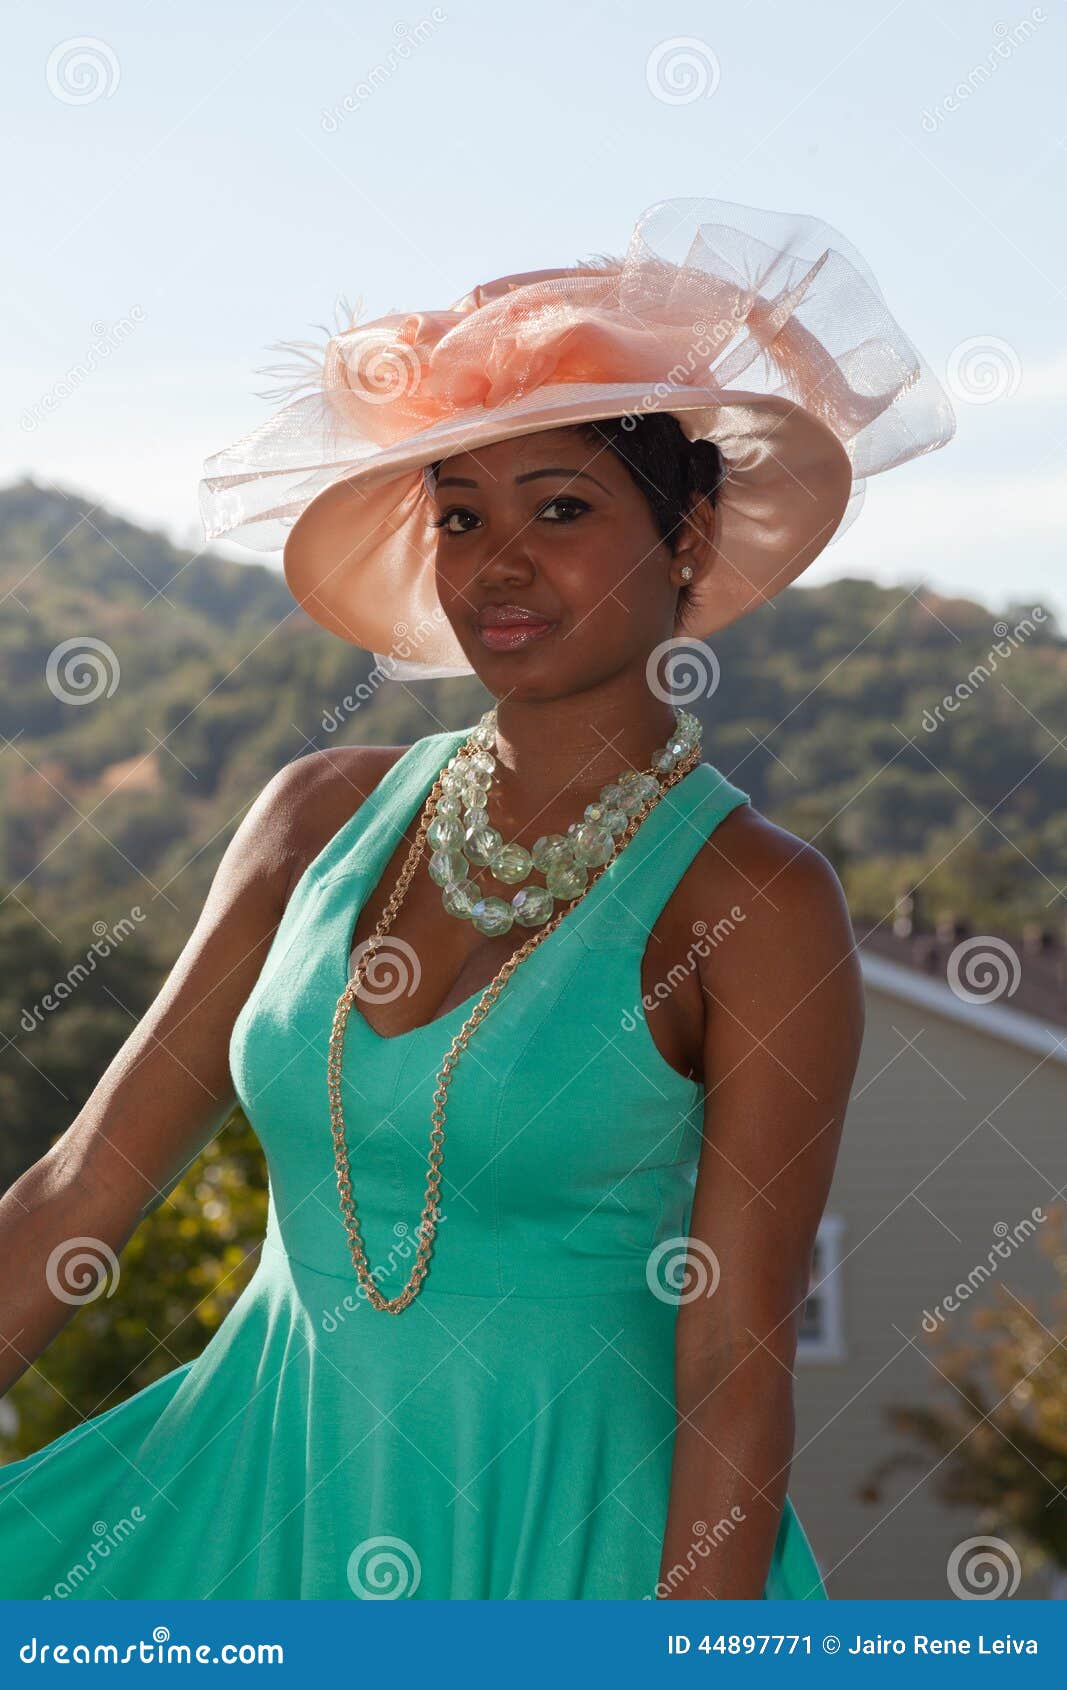 Lola, the Southern Belle with Pink Hat and Green Dress Stock Image ...